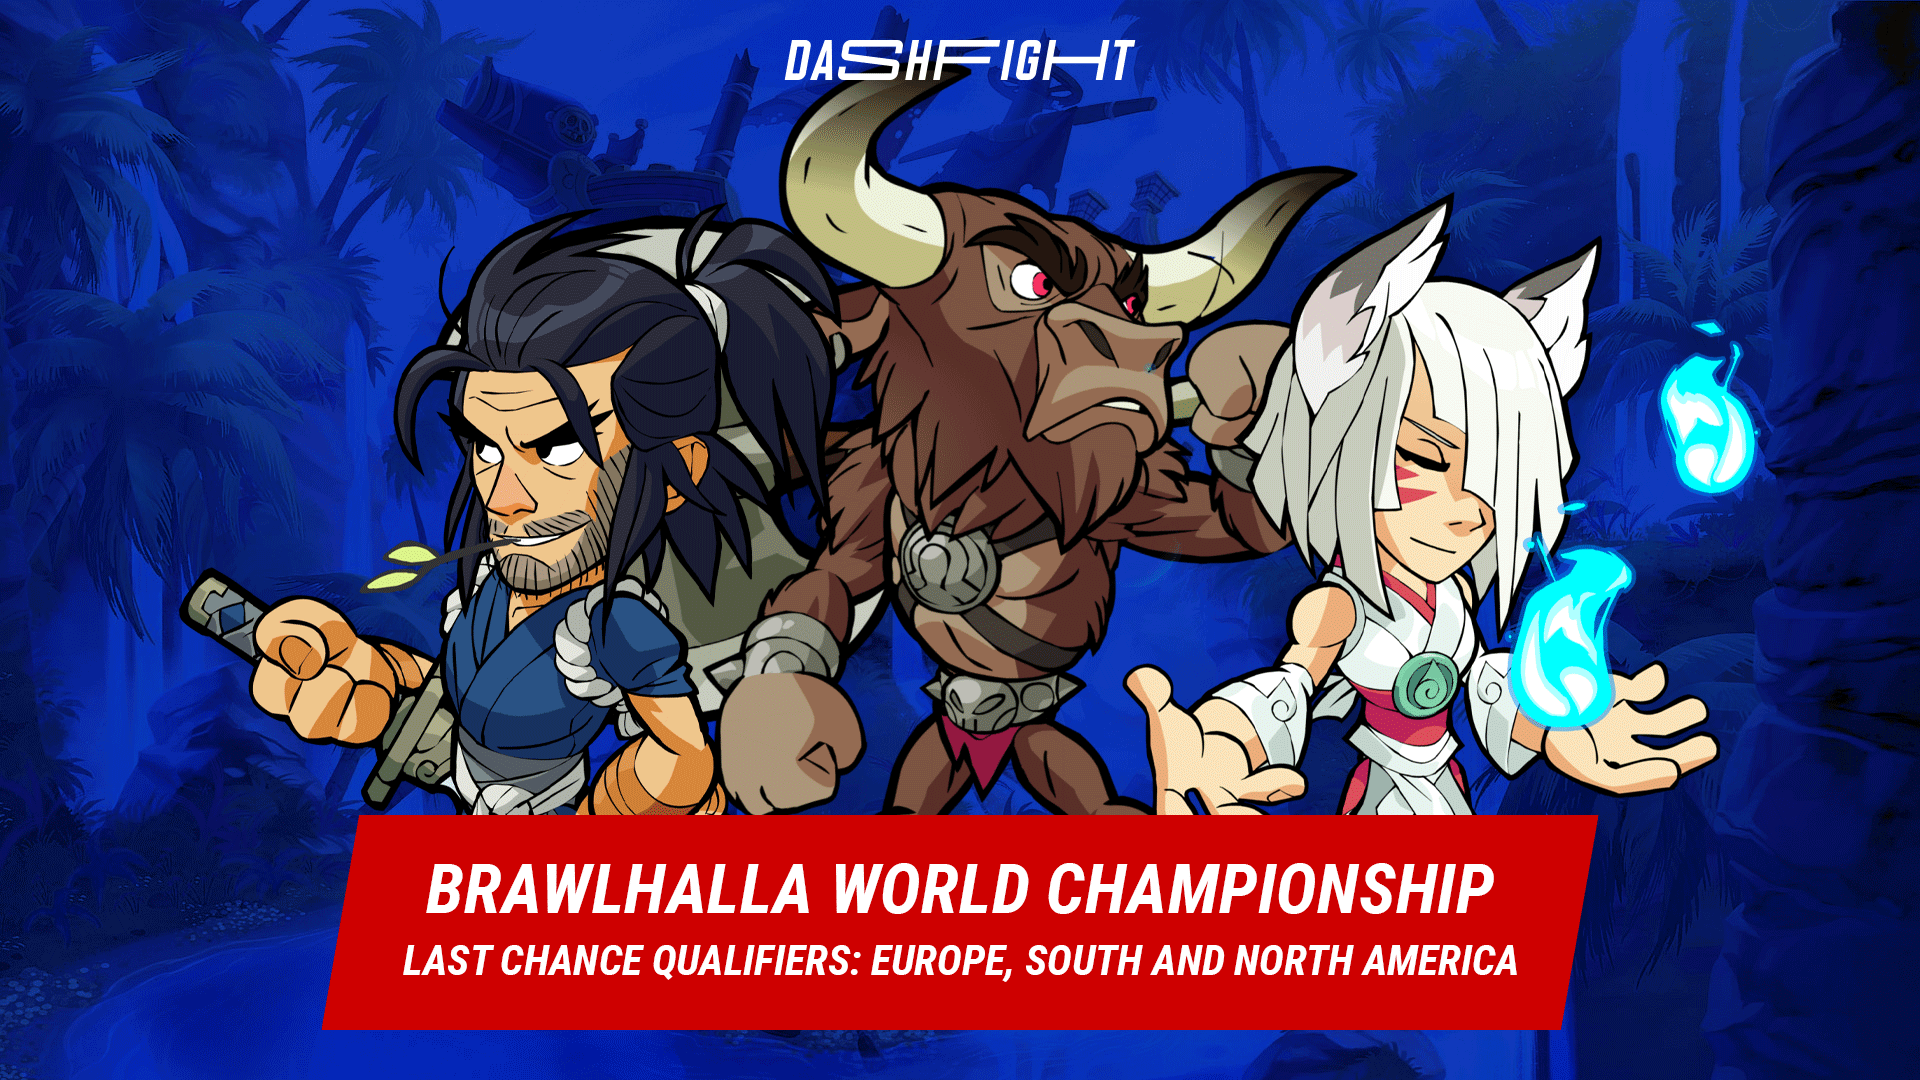 Brawlhalla Esports: Last Chance Qualifiers for the World Championship